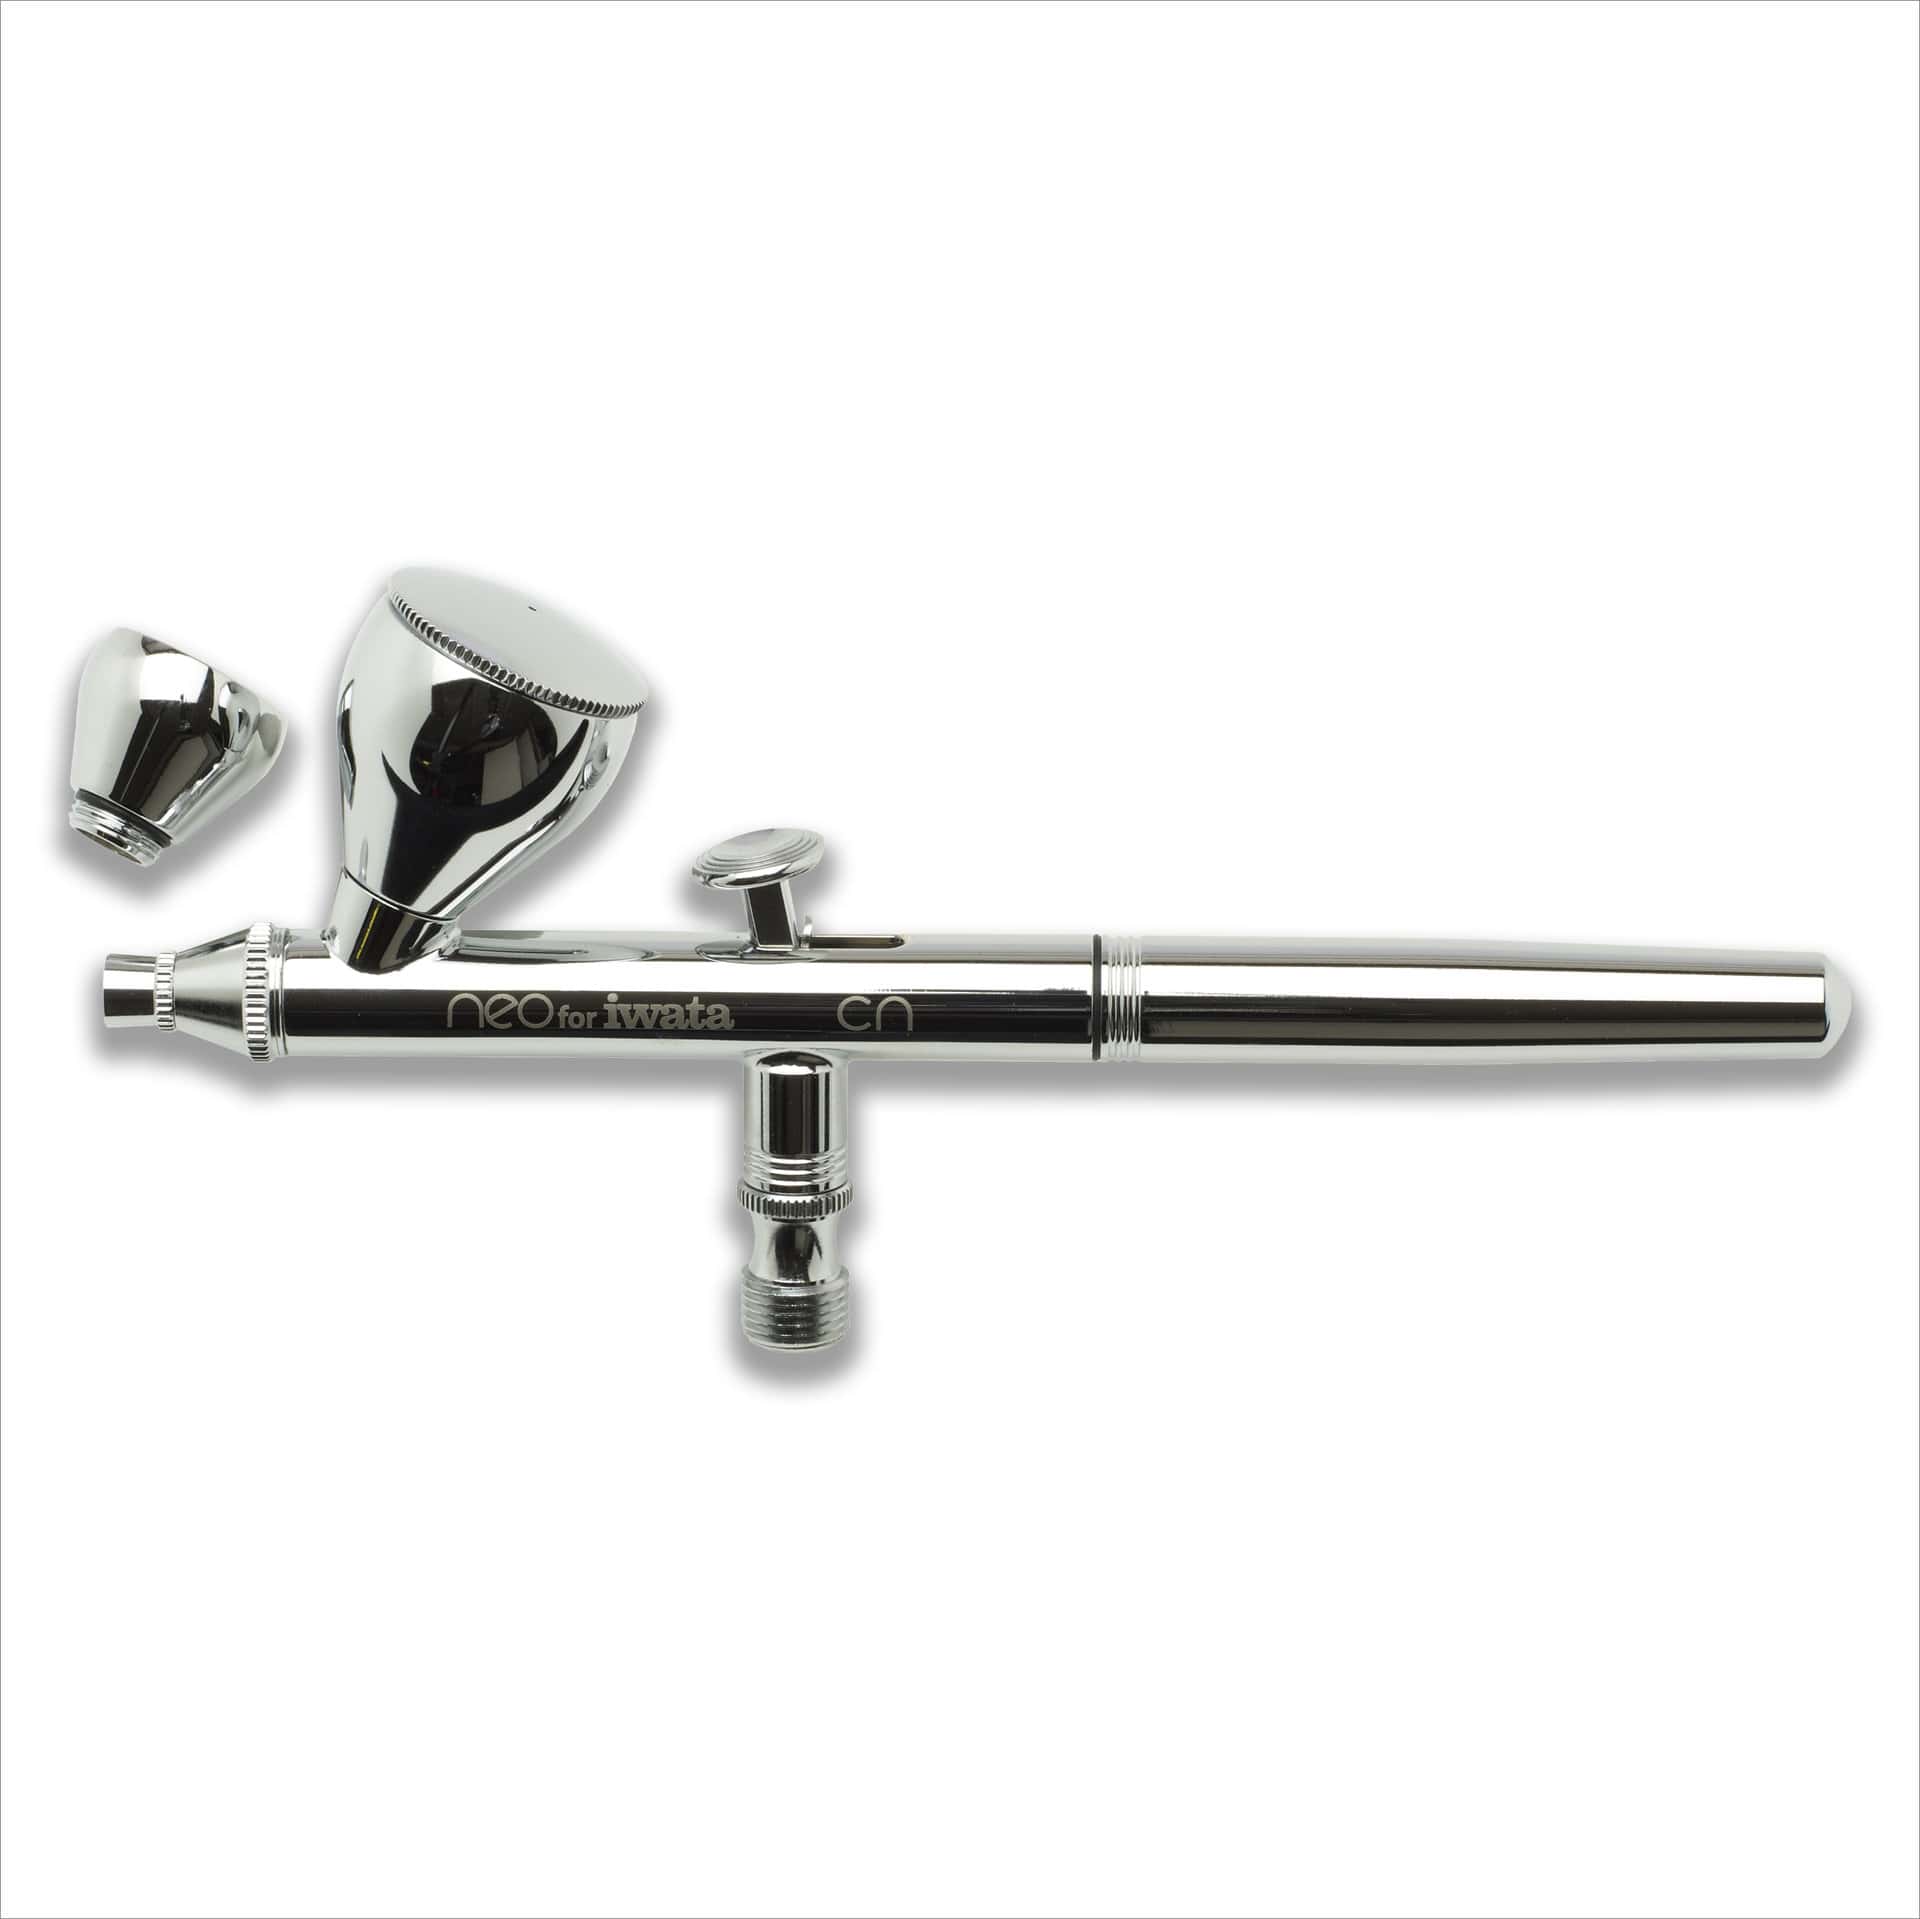 NEO for Iwata CN Gravity Feed Dual Action Airbrush: Anest Iwata-Medea, Inc.